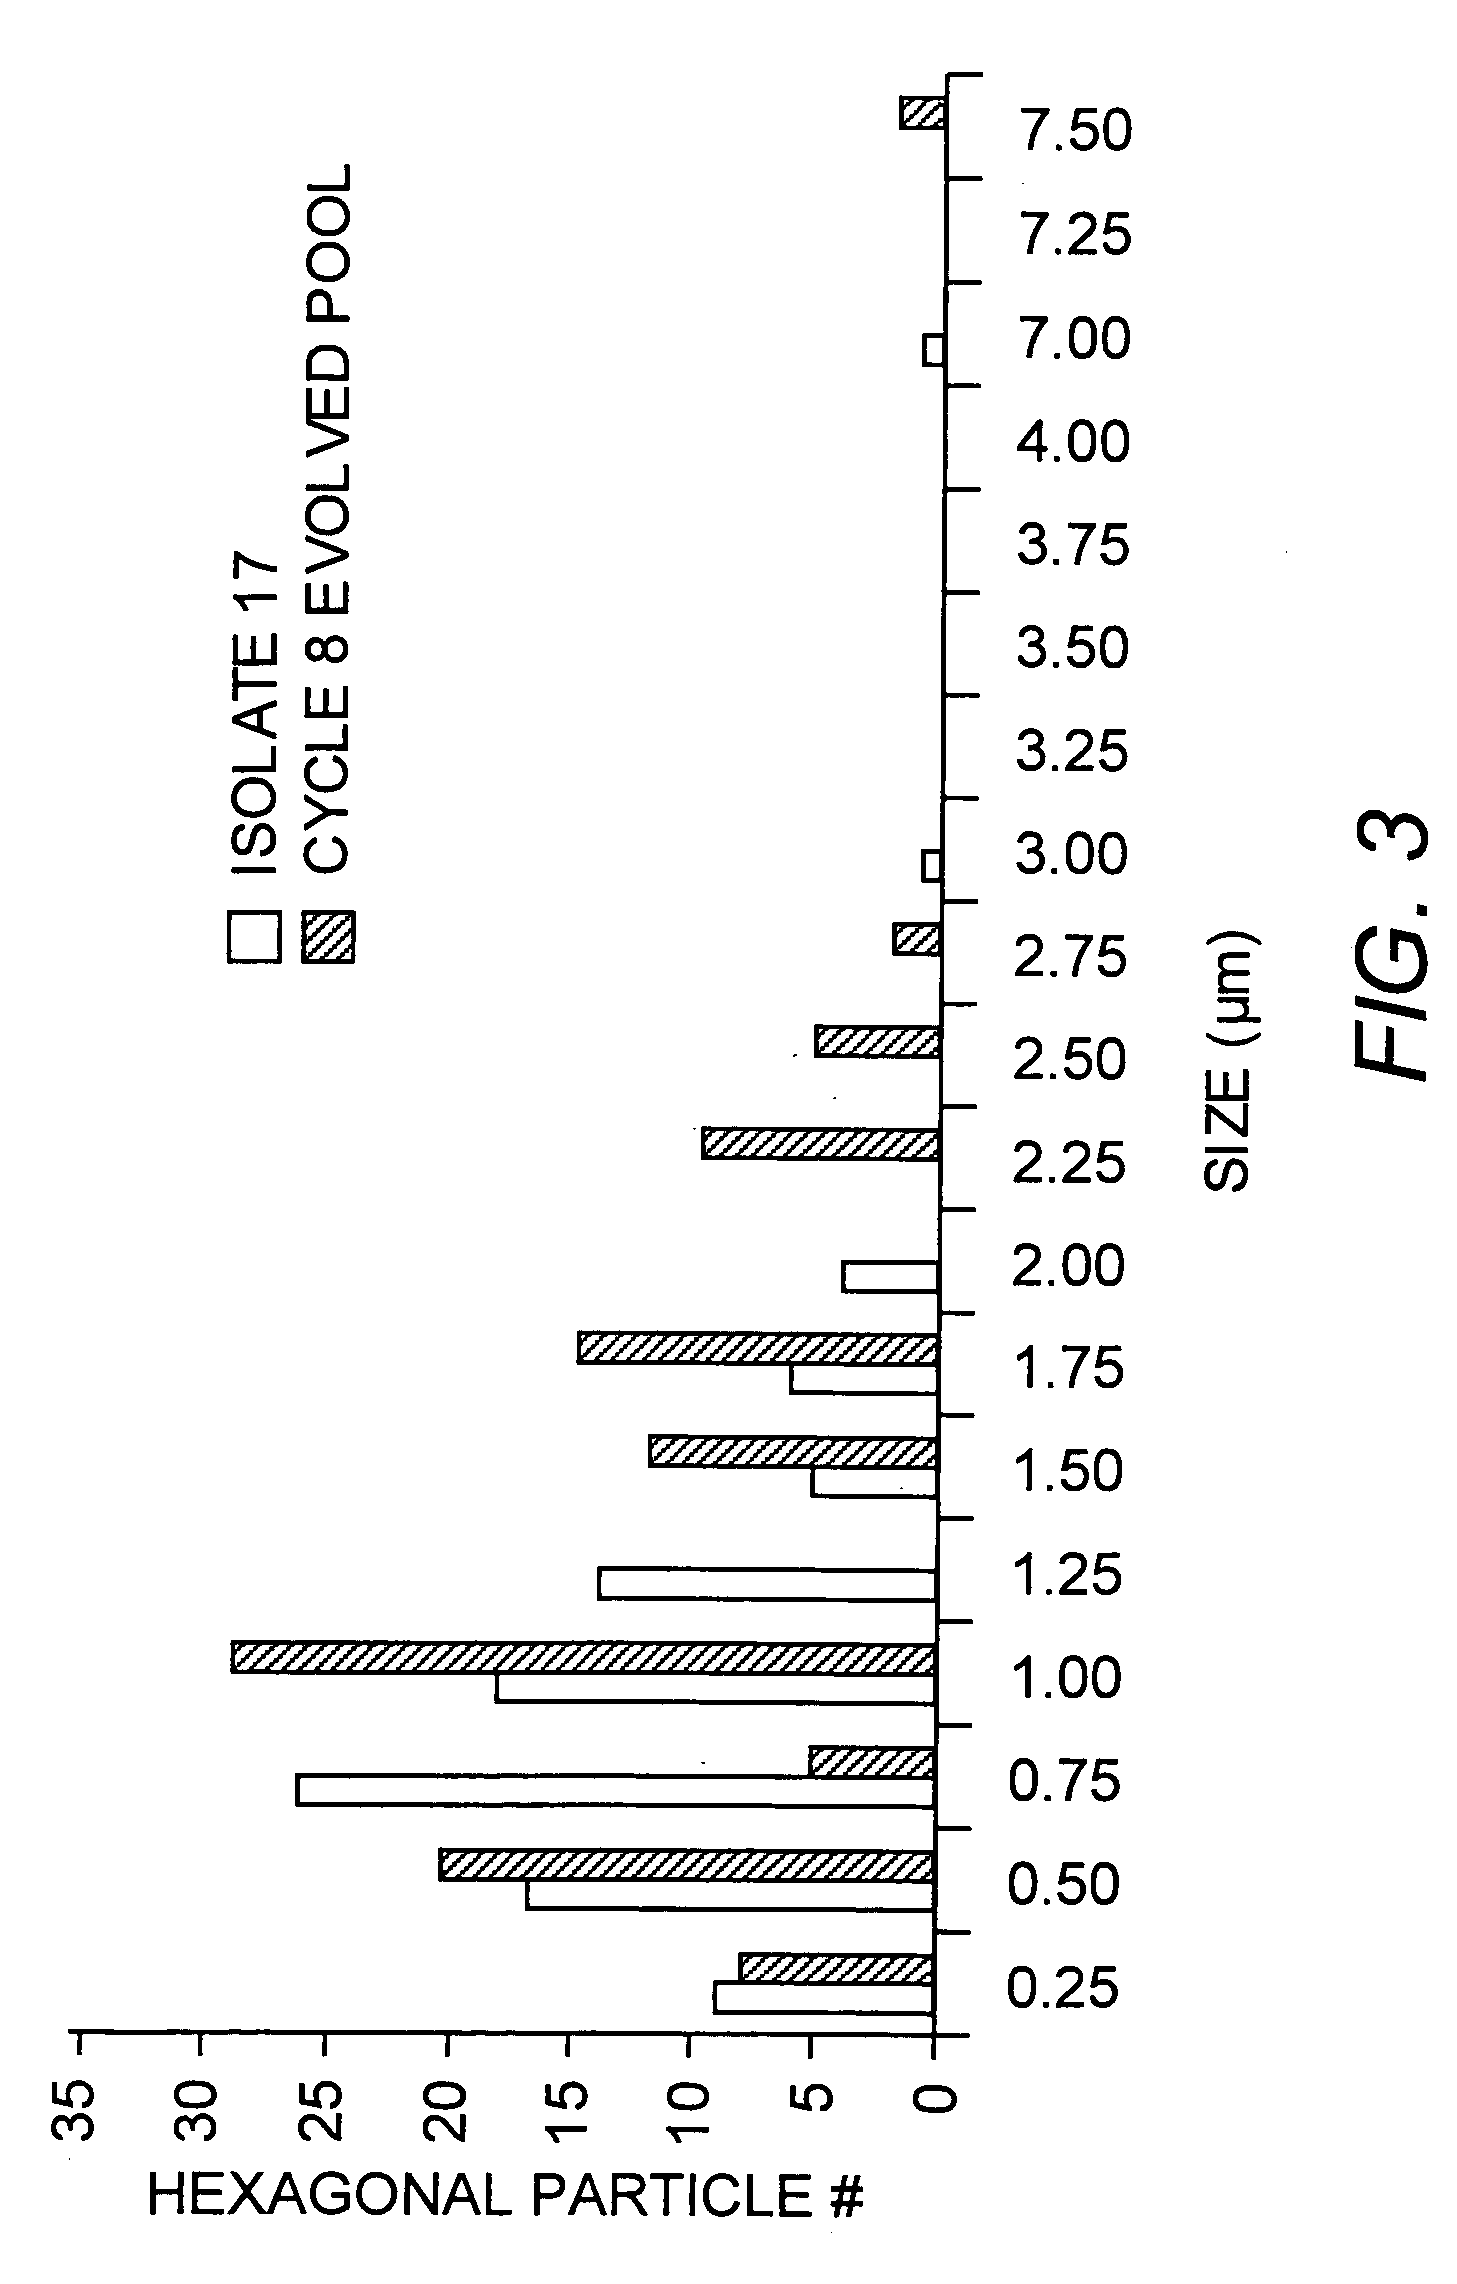 Novel methods of inorganic compound discovery and synthesis